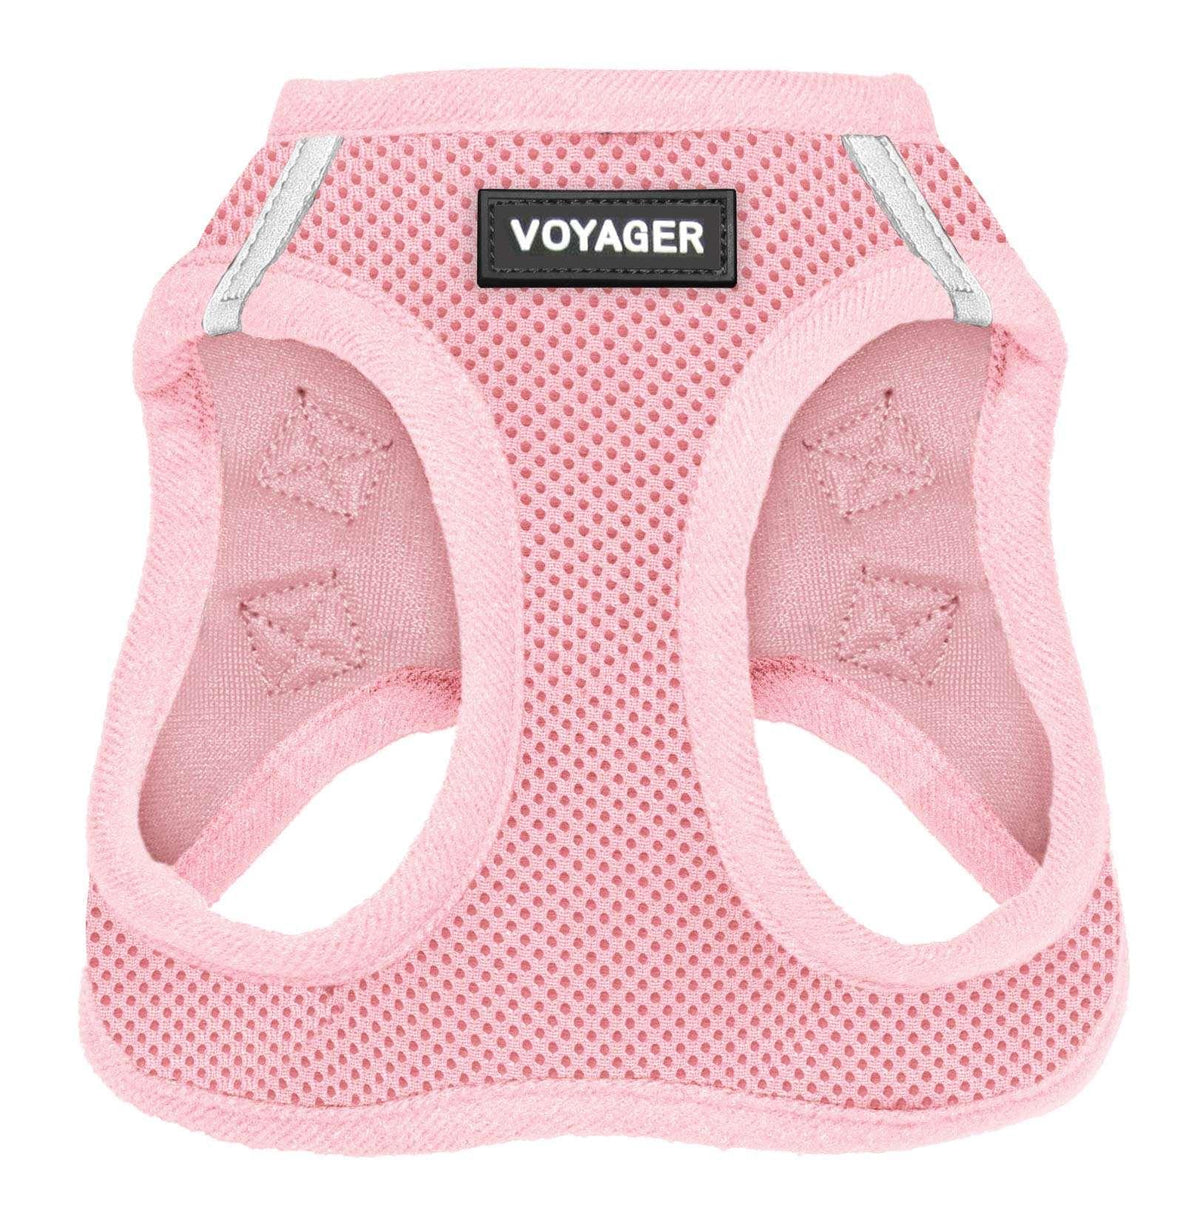 Step-In Air Harness pink with pink trim